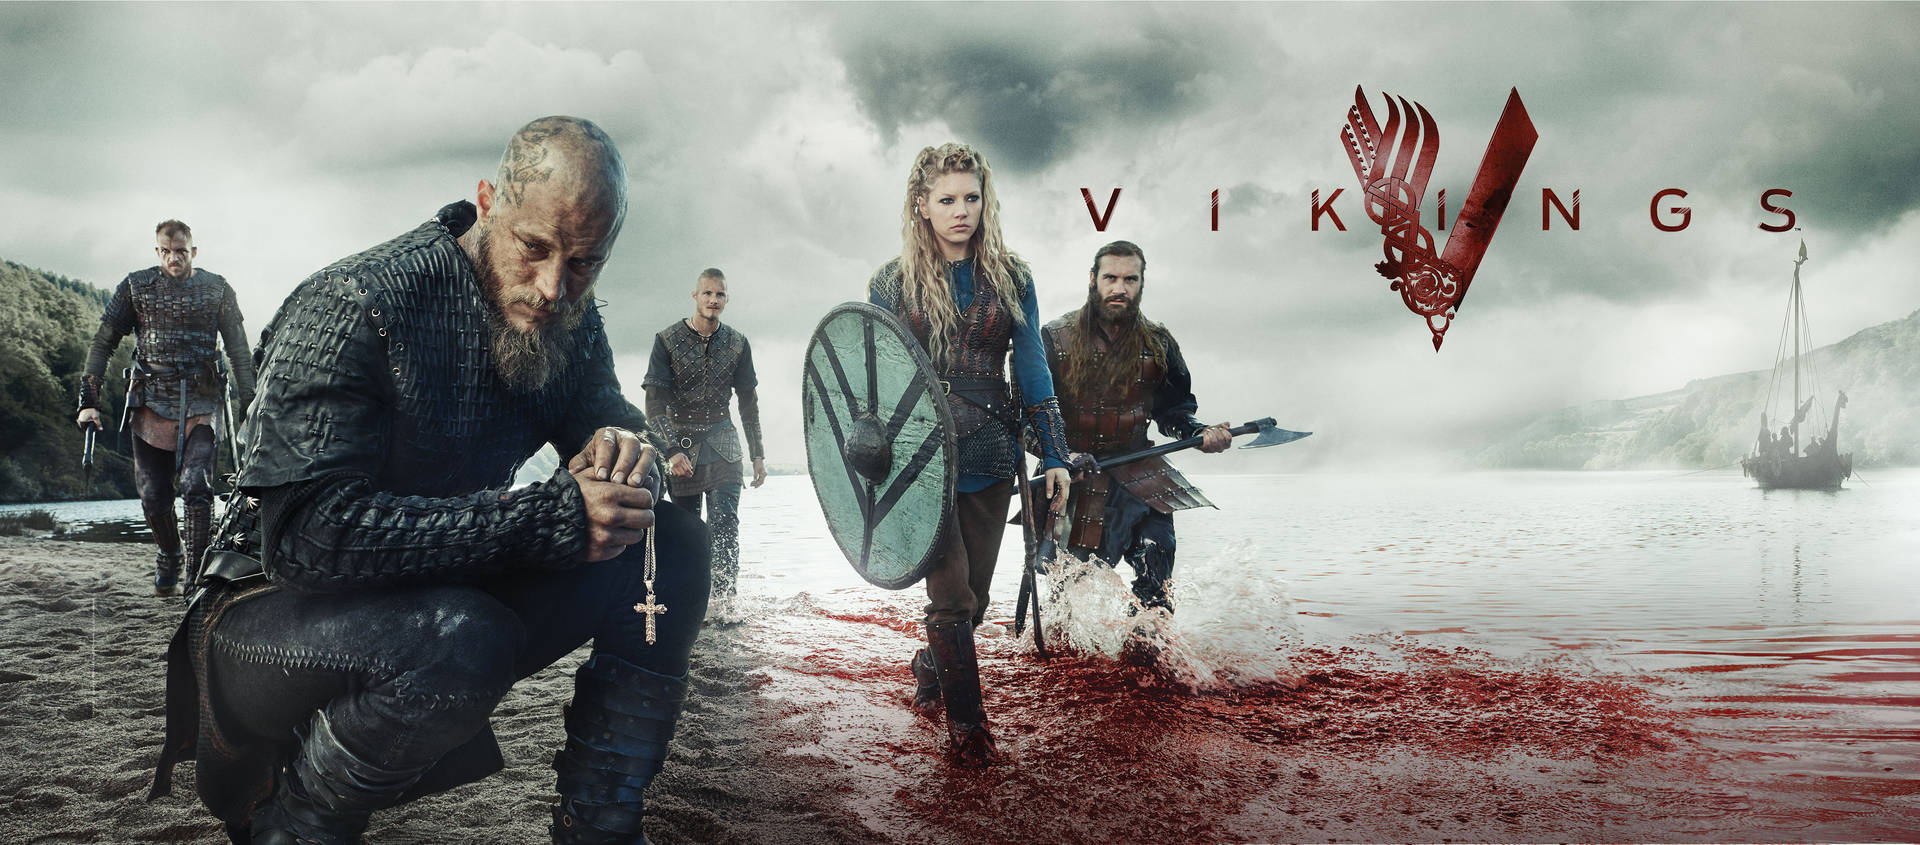 3826X1683 Viking Wallpaper and Background